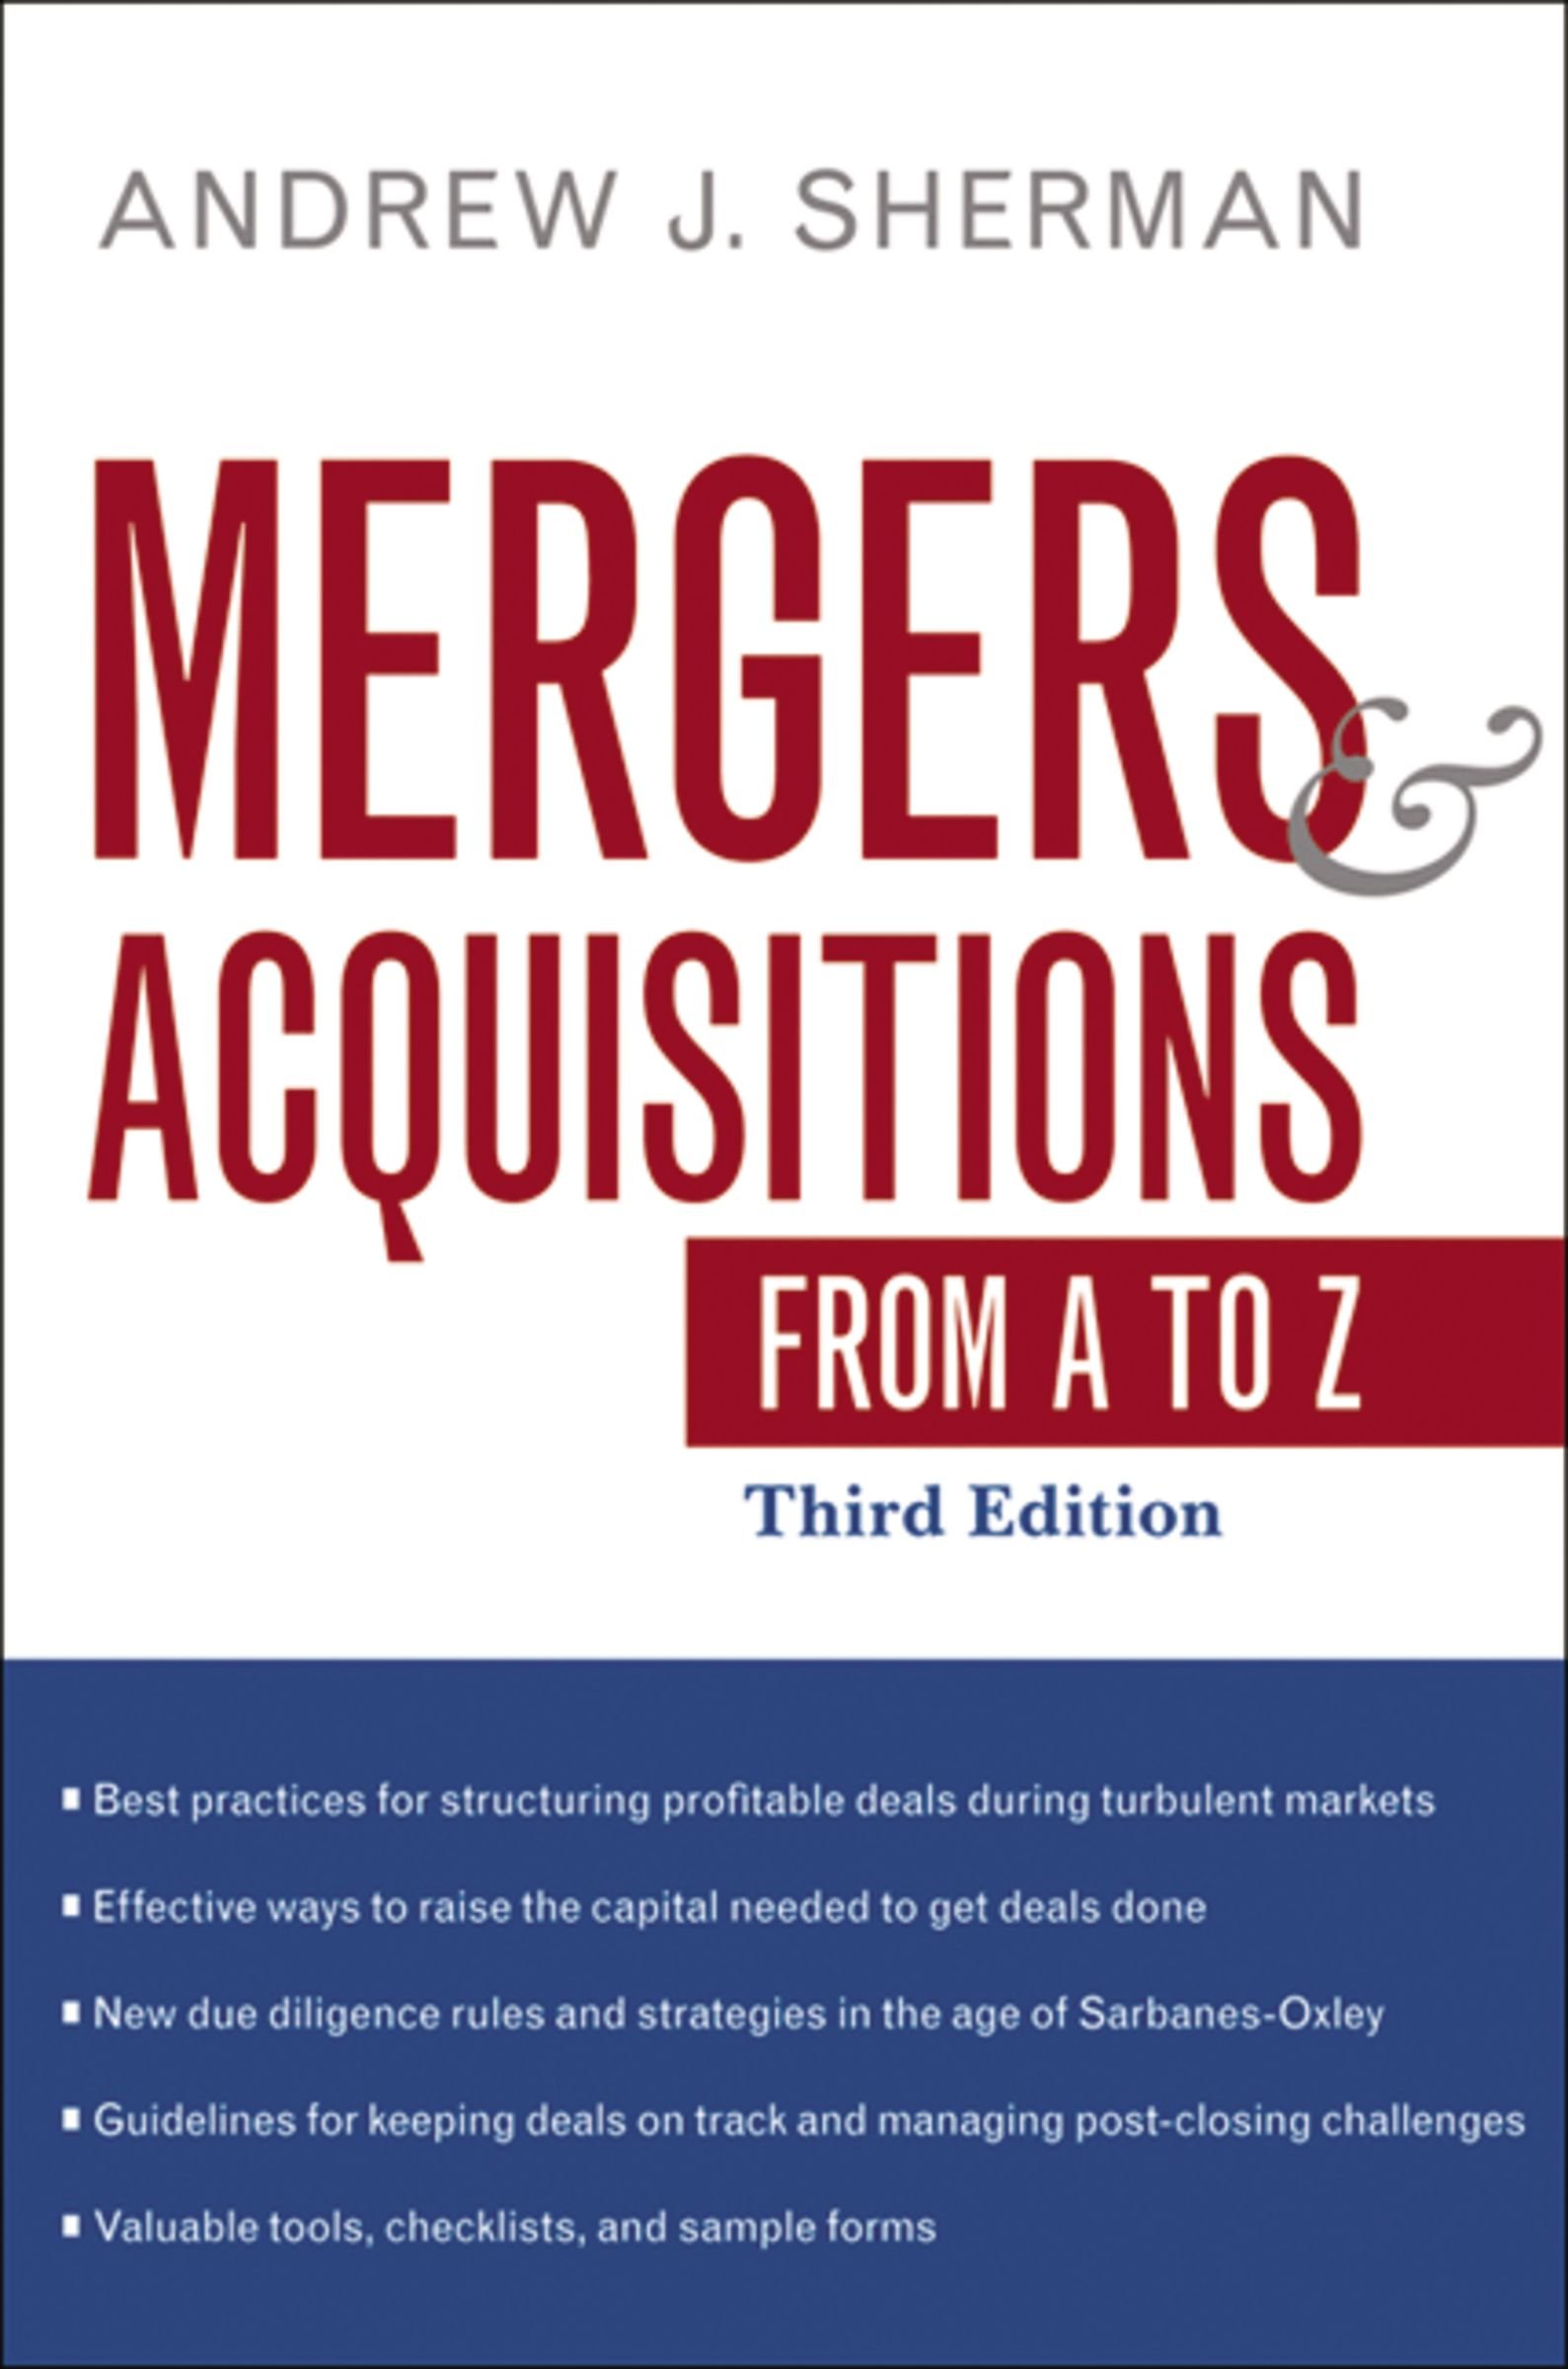 Andrew J.Sherman - Mergers & Acquisitions From A to Z